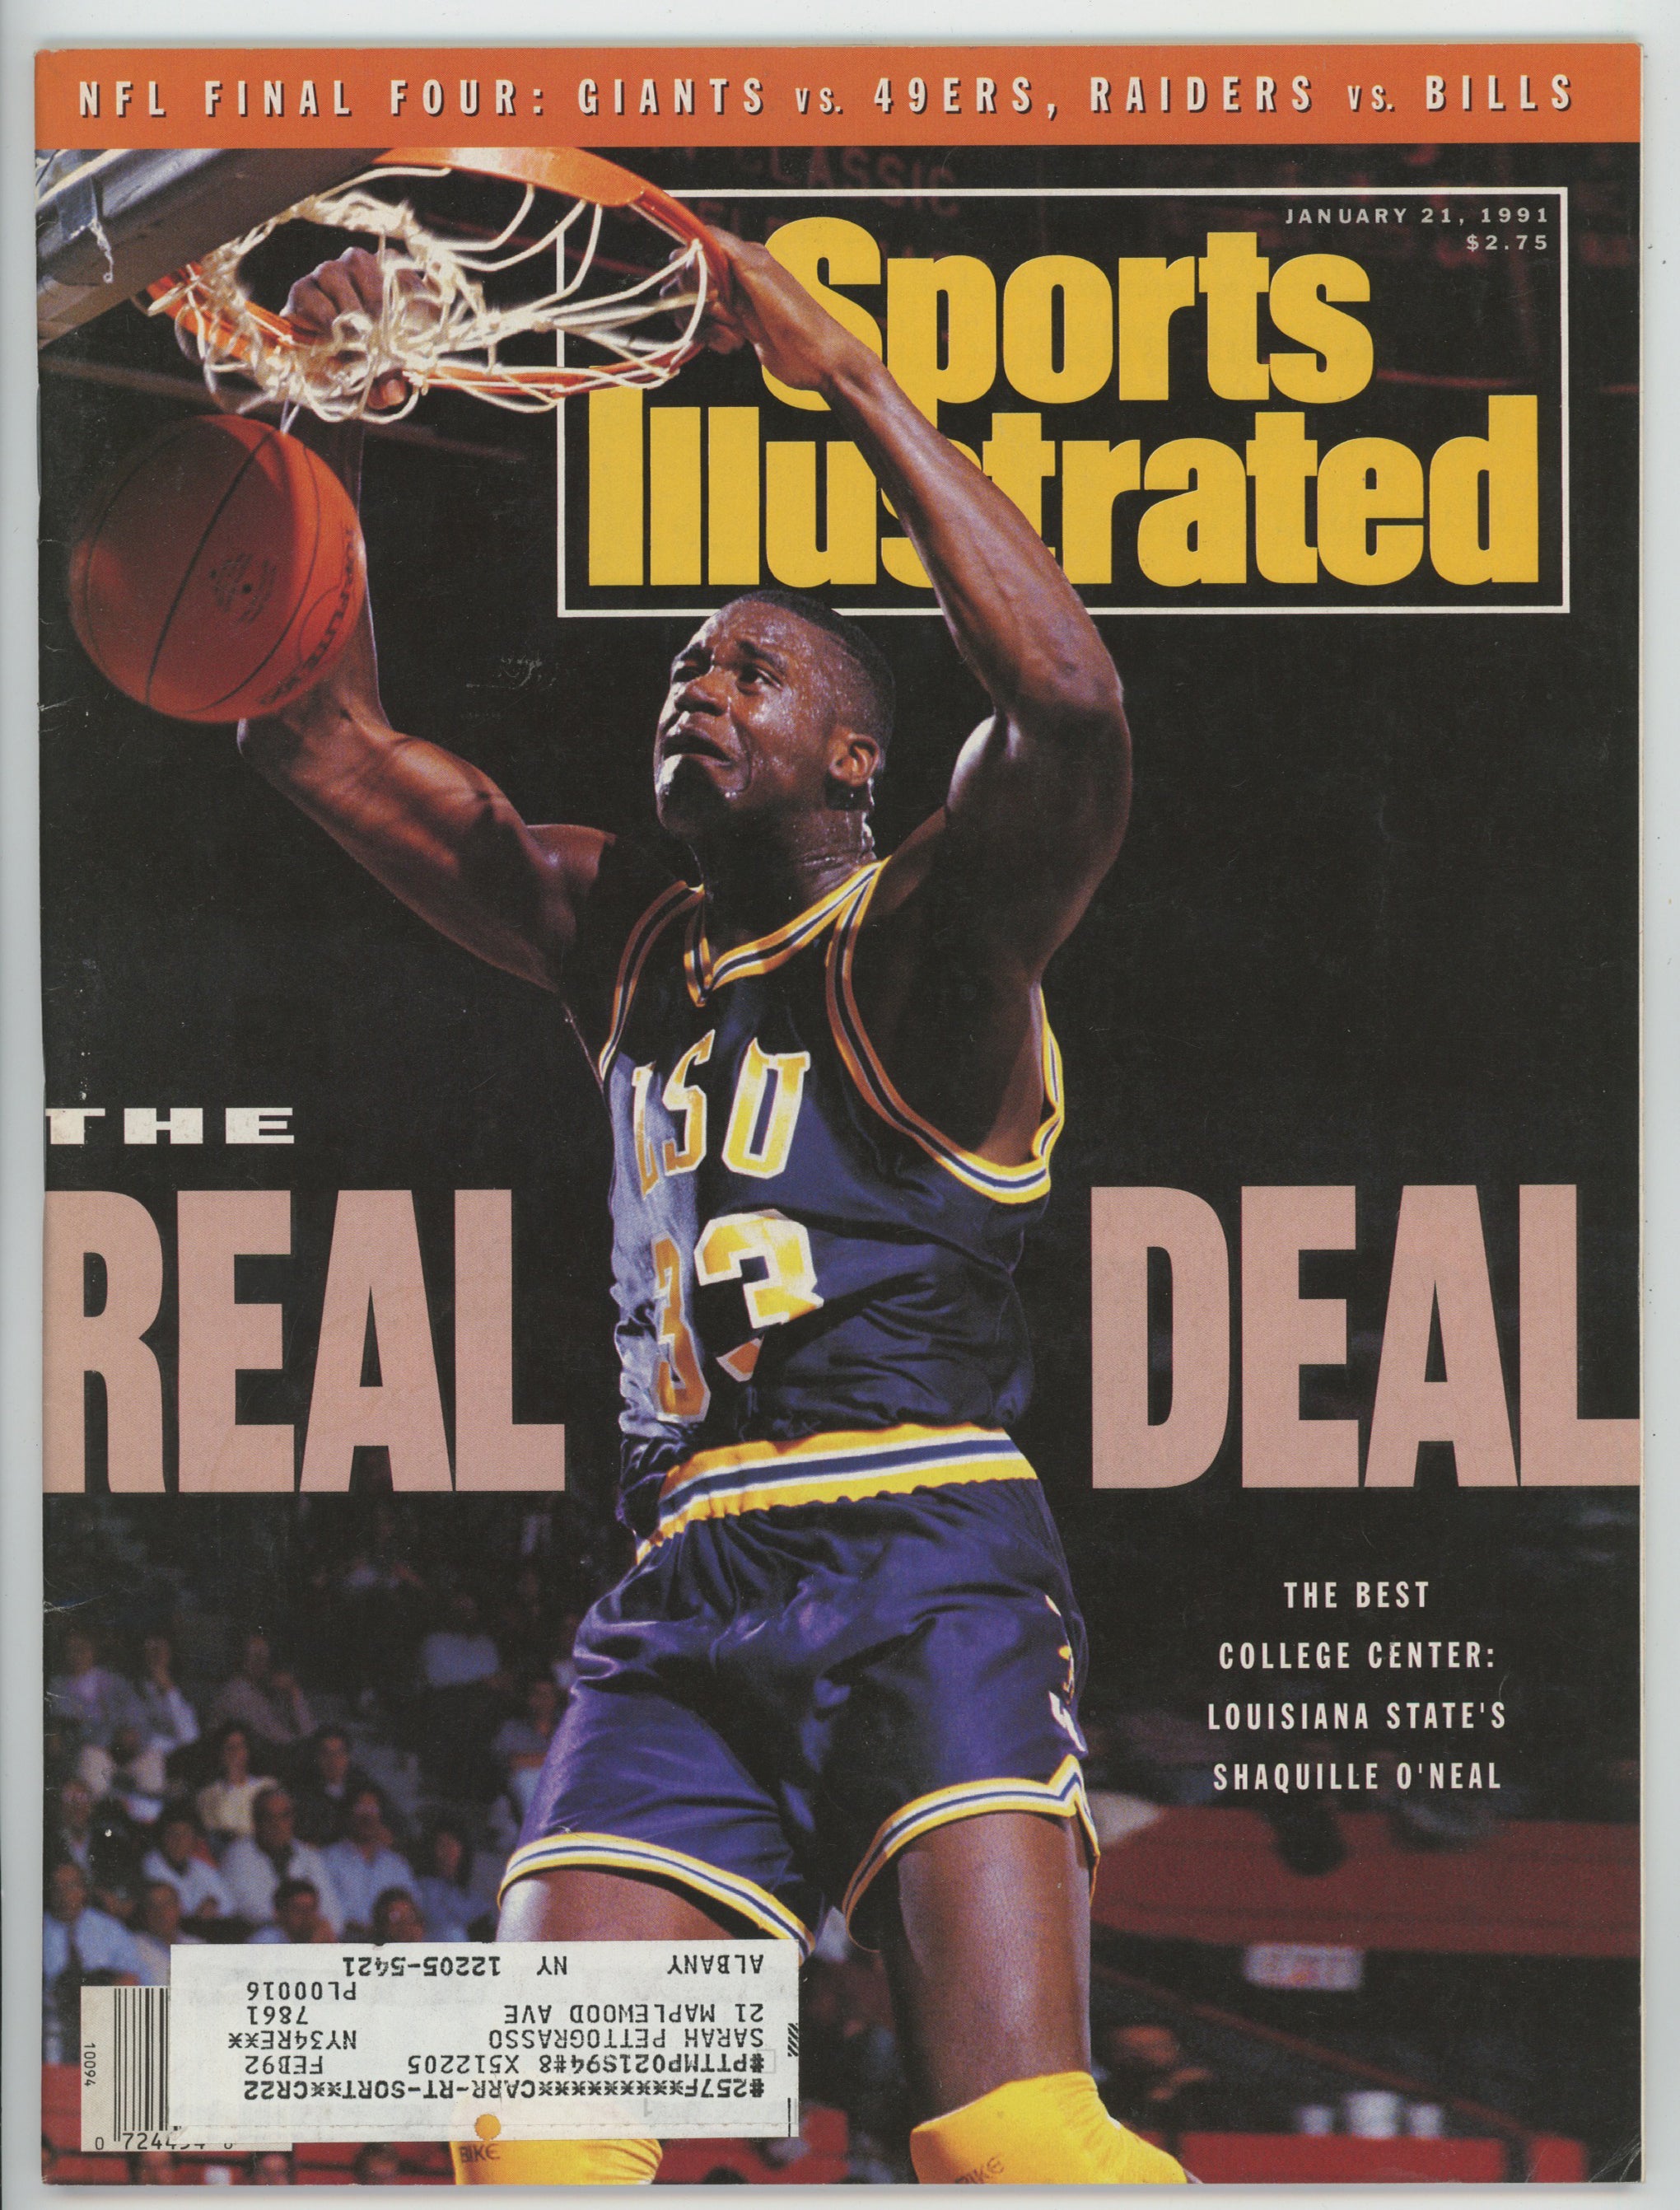 Shaquille O'Neal LSU "REAL DEAL" The Best College Center 1/21/91 Sports Illustrated ML